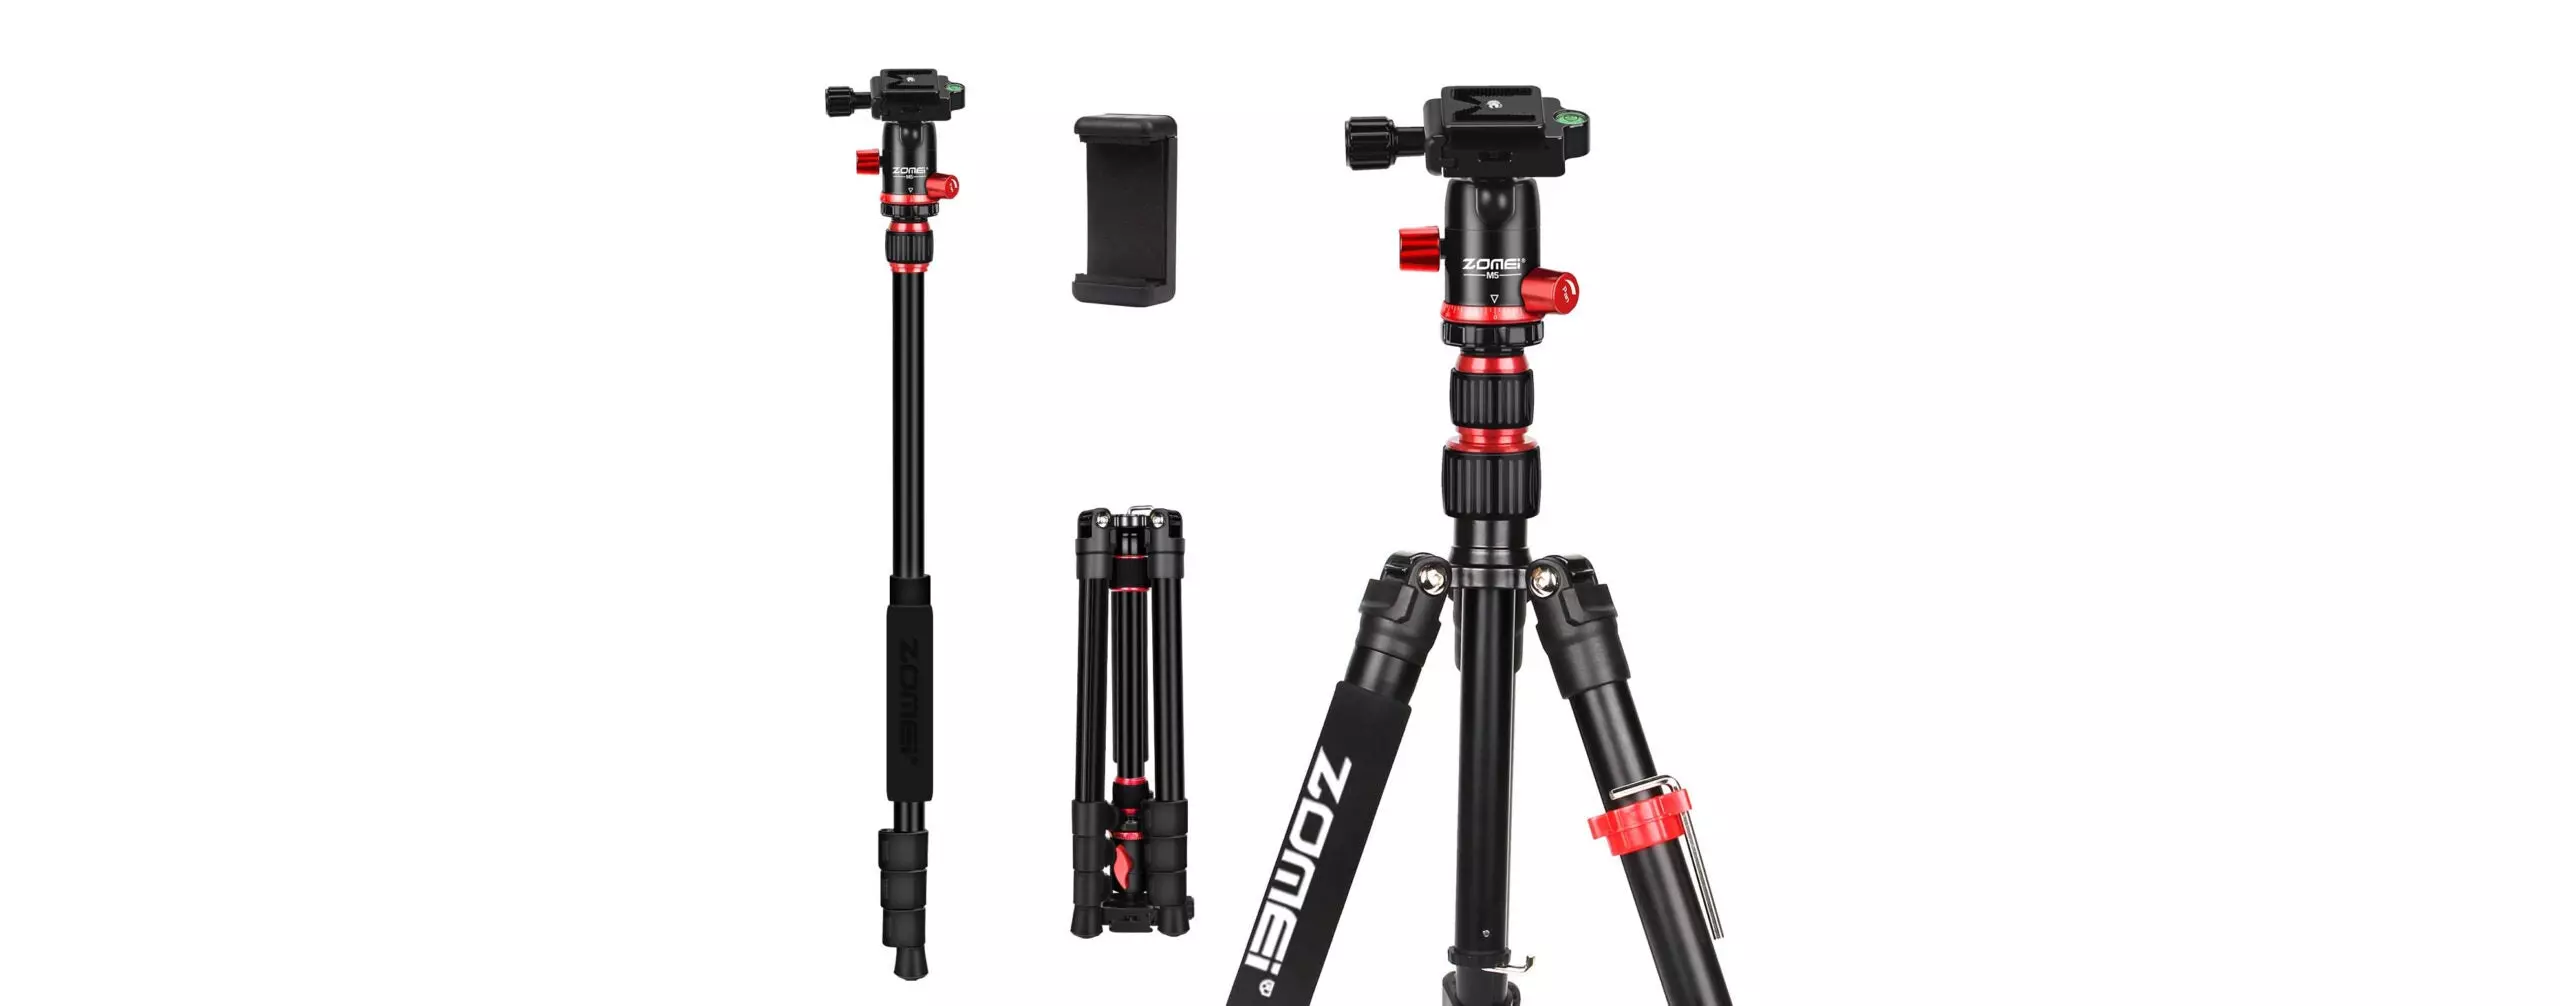 The Best Hiking Tripods (Review and Buying Guide) in 2022